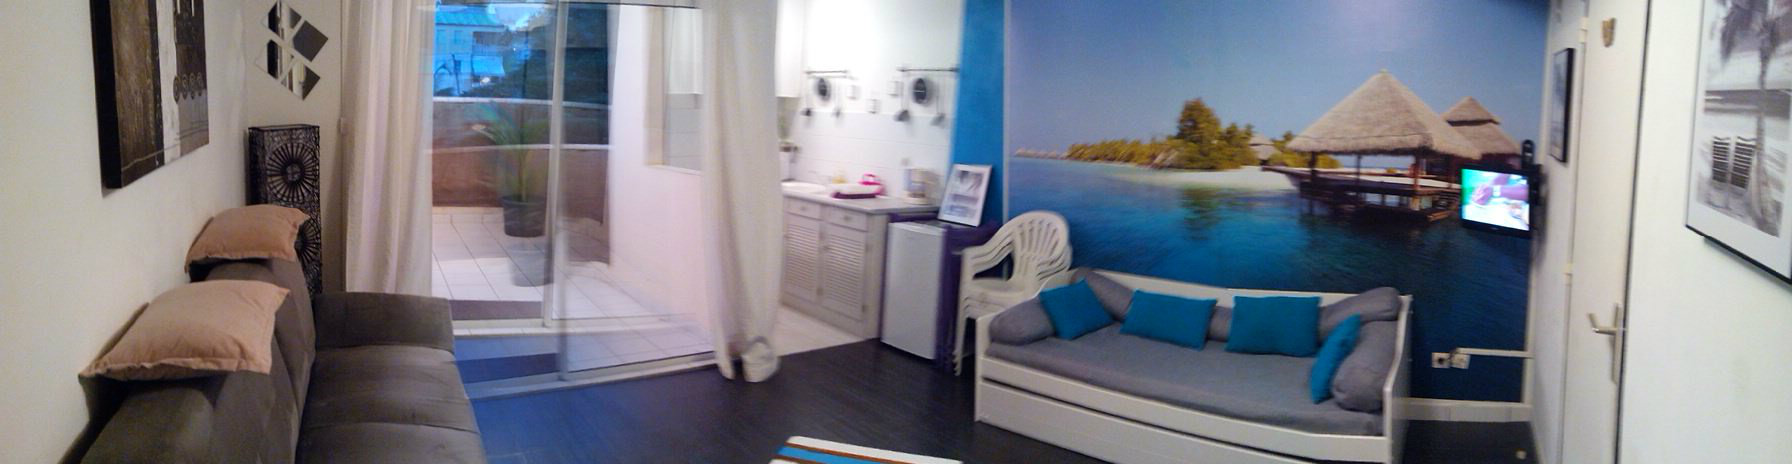 Studio in Trois ilets - Vacation, holiday rental ad # 39095 Picture #8 thumbnail